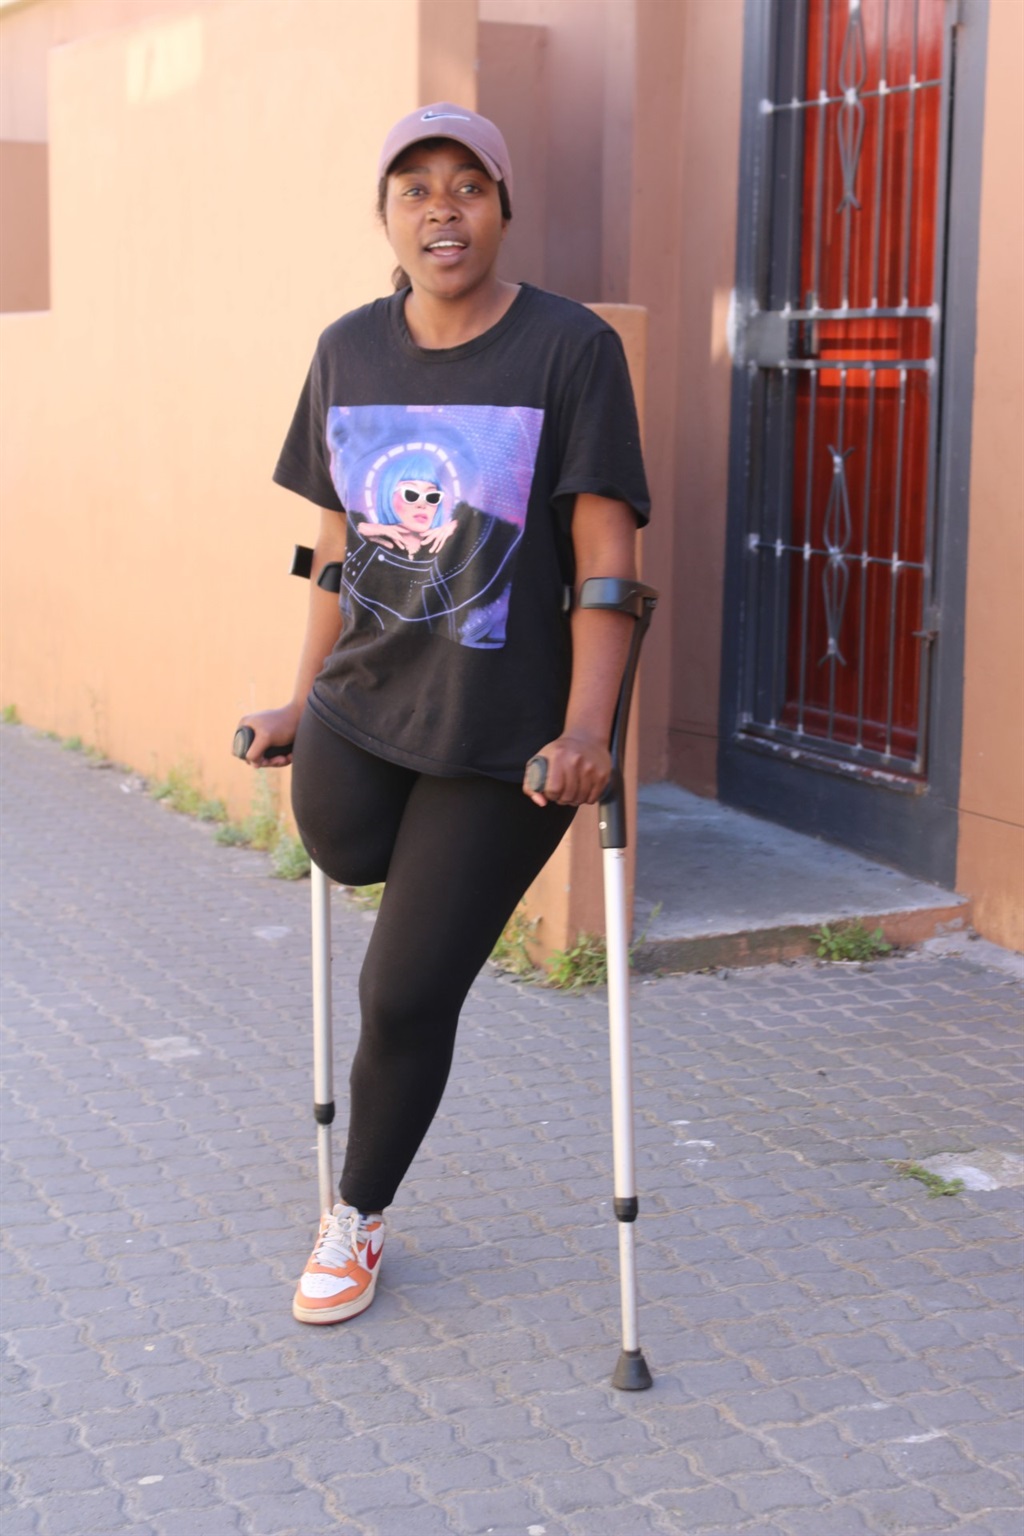 Awethu Njomane says she was shot by a cousin of he